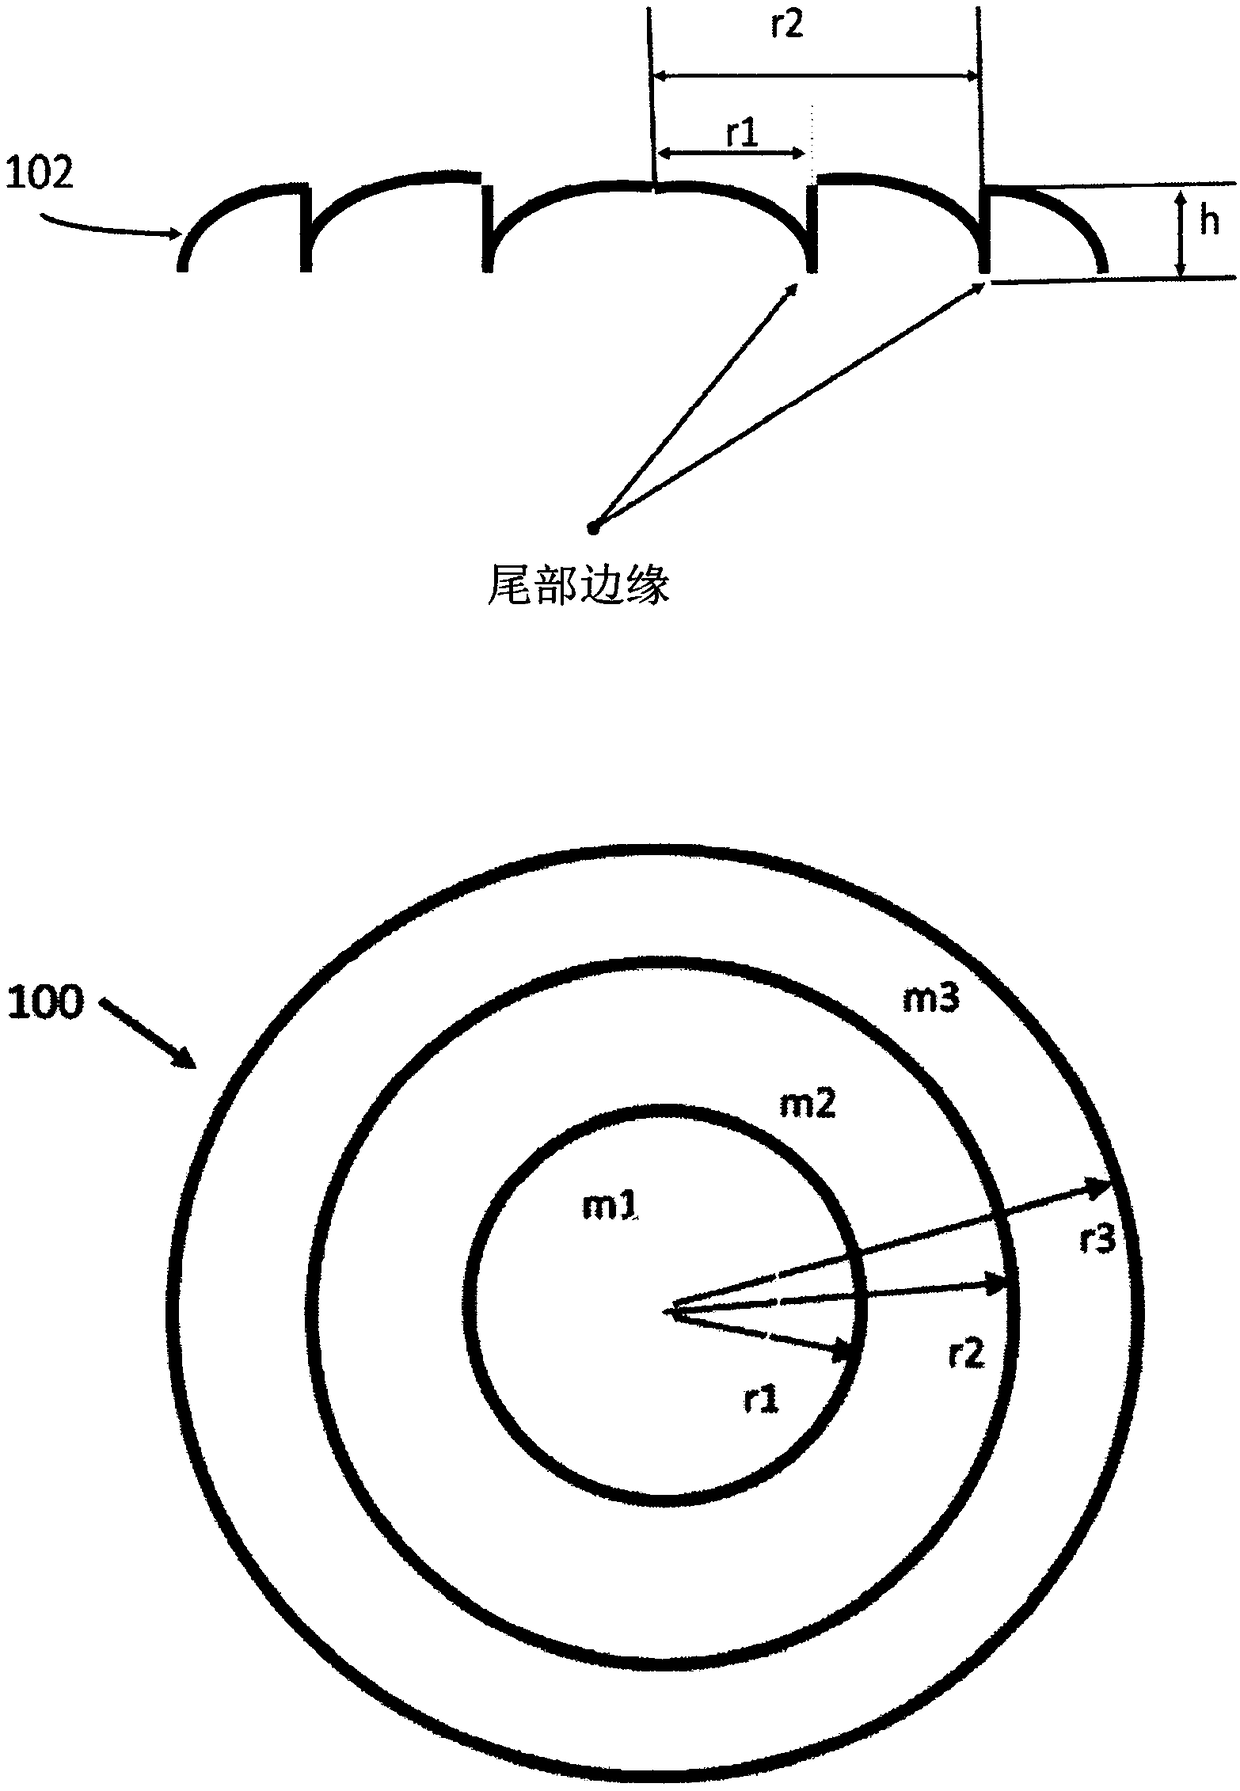 Intraocular lens and associated design and modeling methods